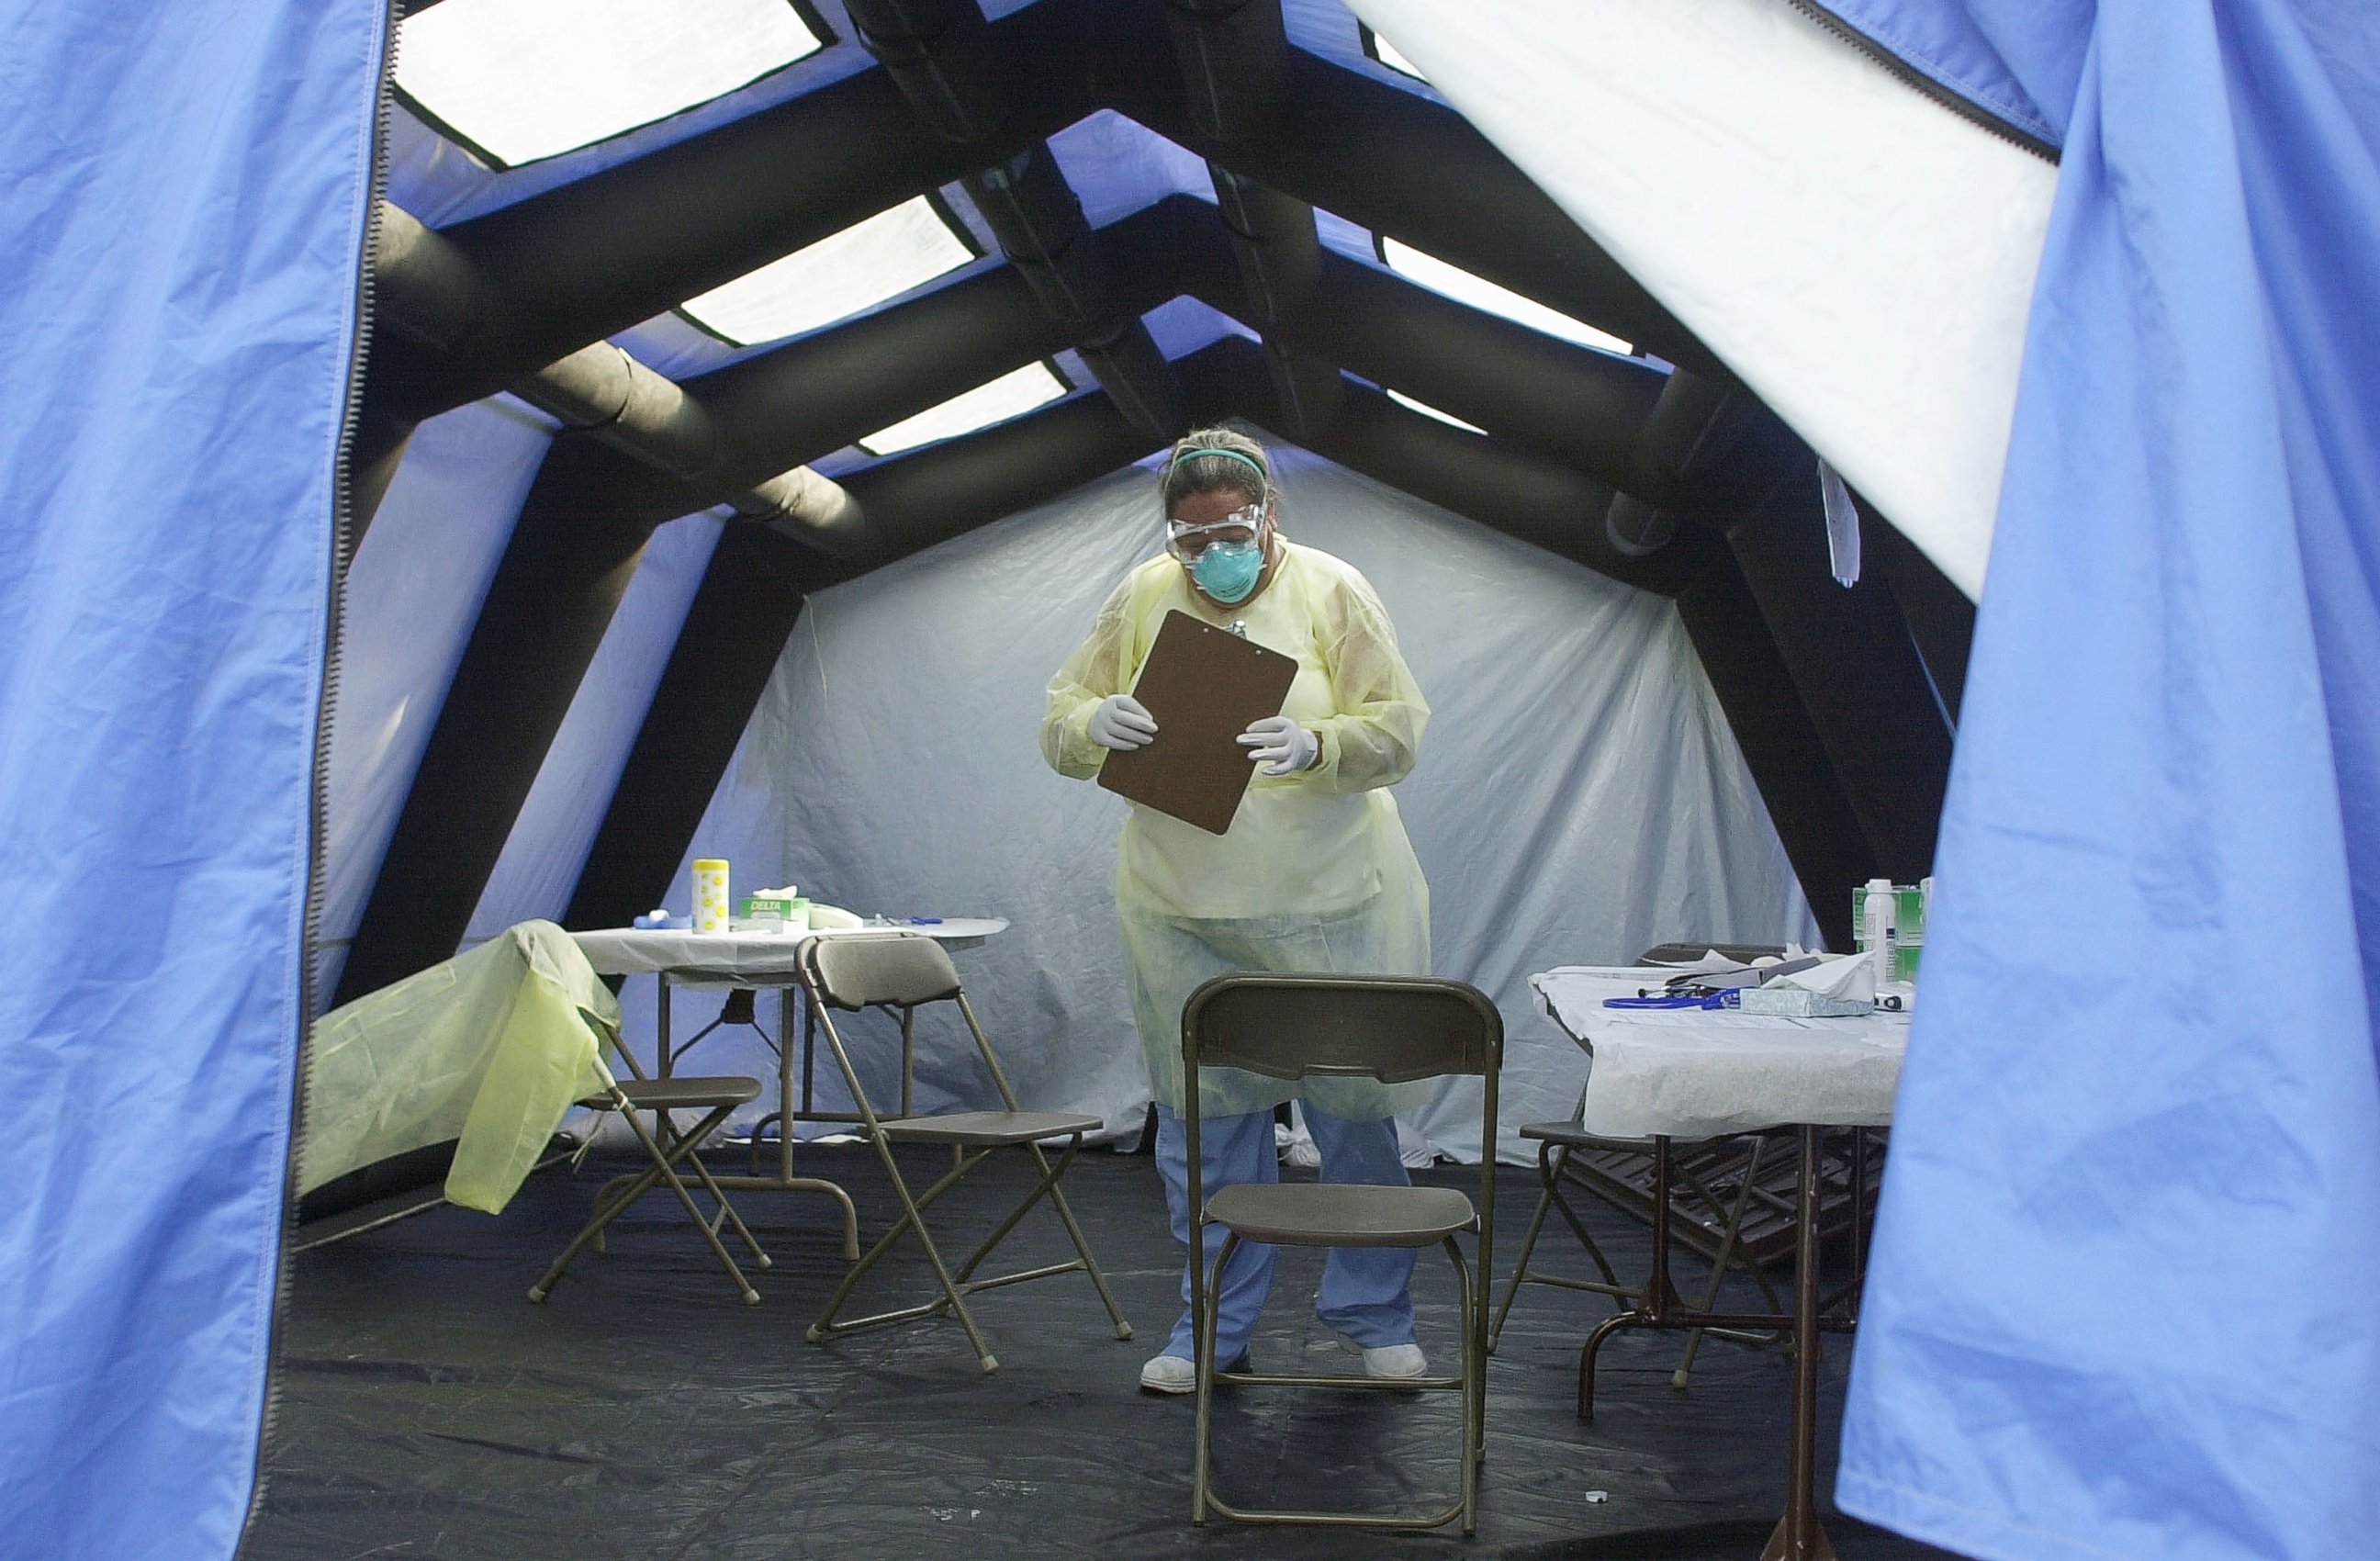 PHOTO: Deddie Craig, a registered nurse at UNC Hospitals, retrieves paperwork from a screening tent at the SARS medical screening facility on June 13, 2003 in Chapel Hill, N.C.